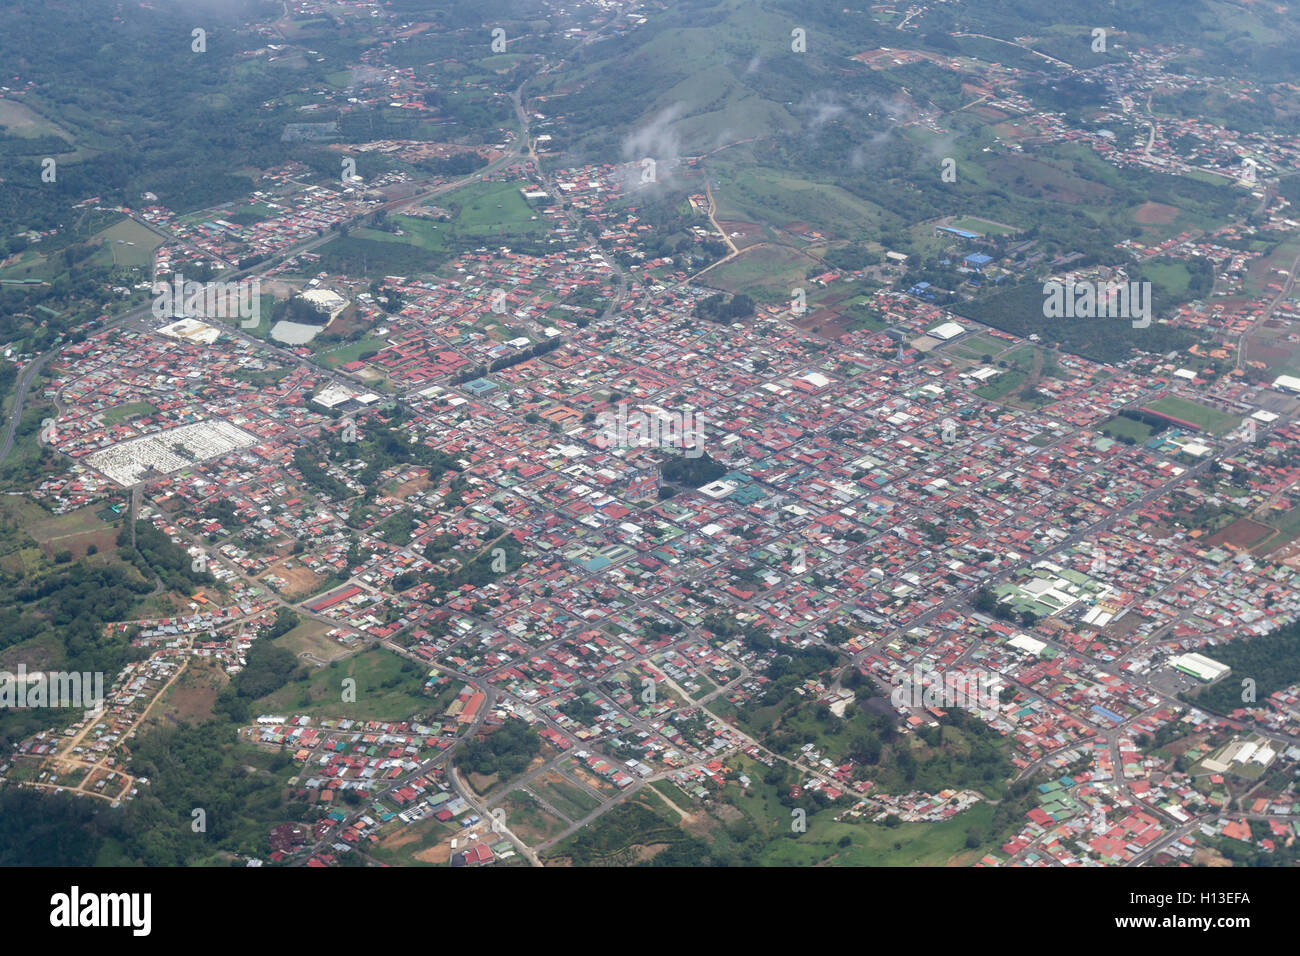 Alajuela, Costa Rica - May 24 : Aerial view of the city of San Ramon, Costa Rica. May 24 2016, Alajuela Costa Rica. Stock Photo